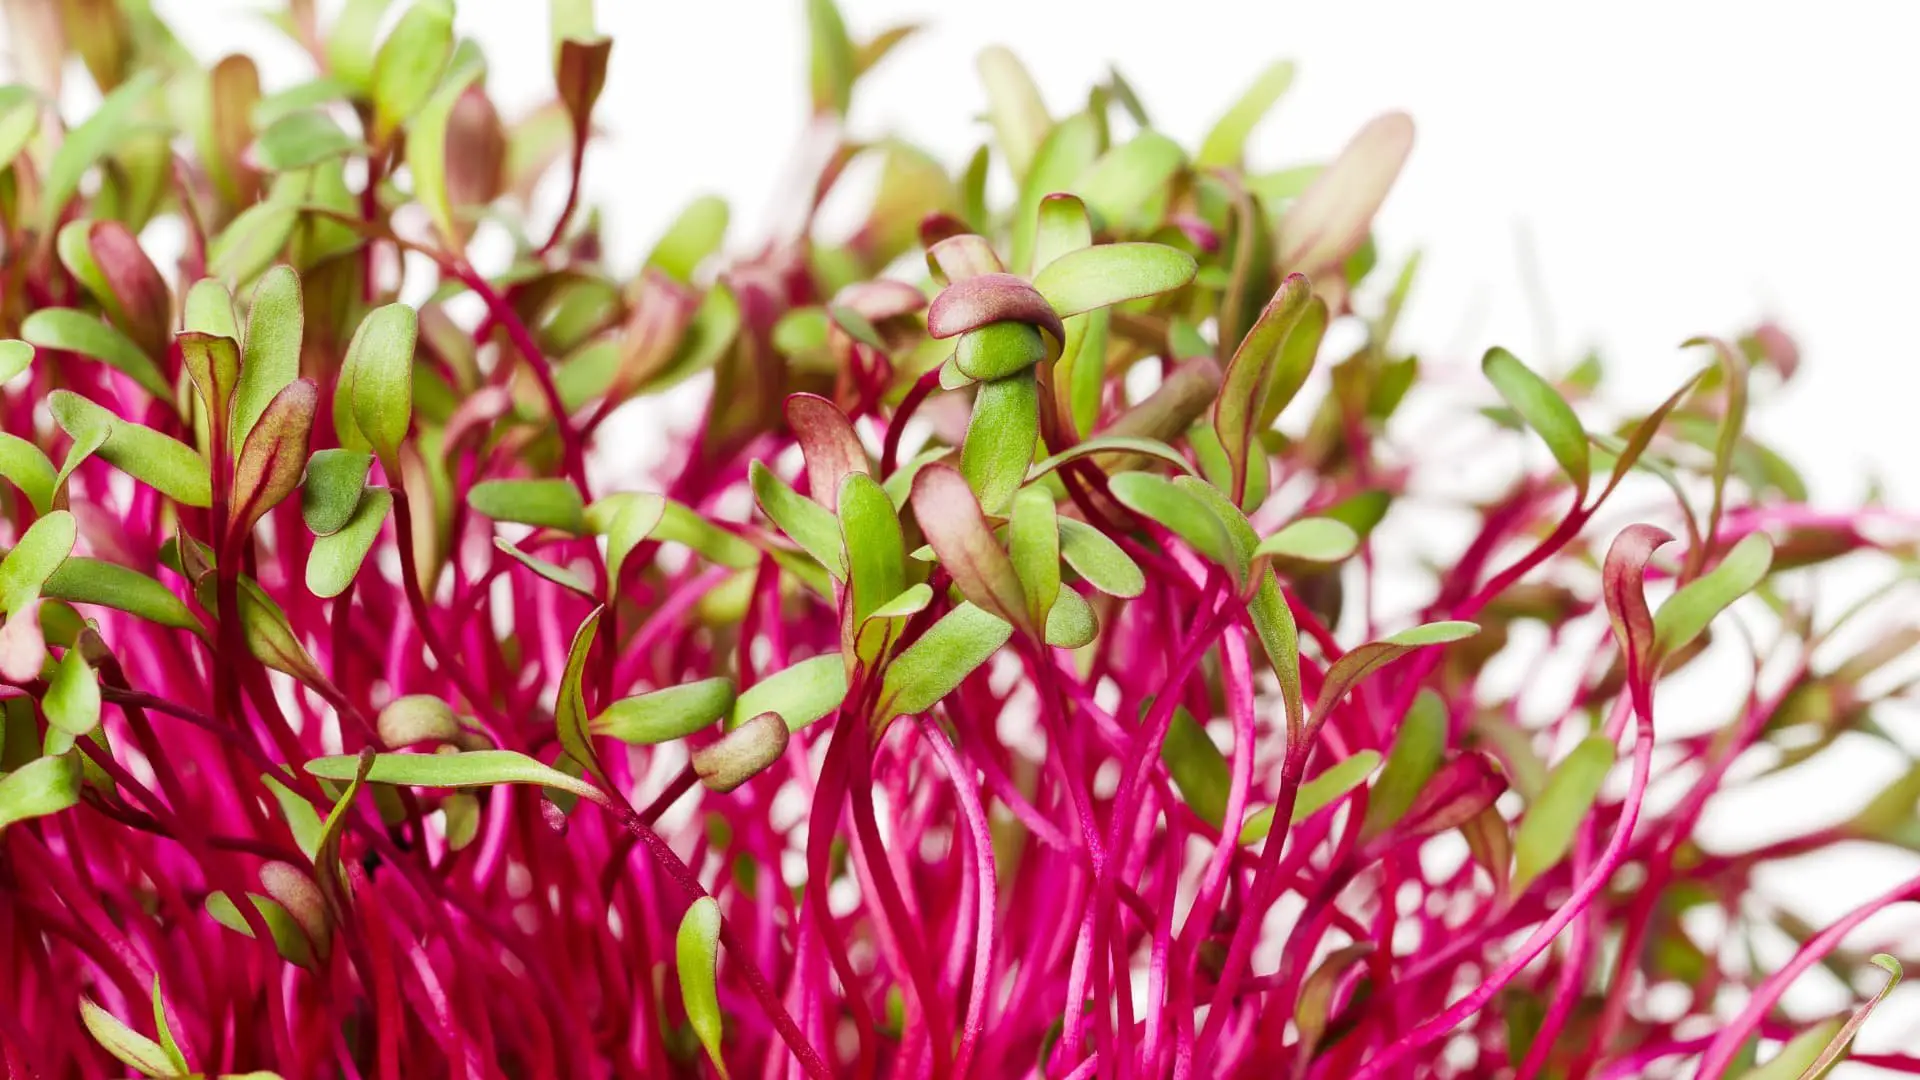 % If you're a microgreen grower, then you need to know what growing medium works best. Here are three suitable hydroponic growing mediums and things to consider when choosing the best explained.